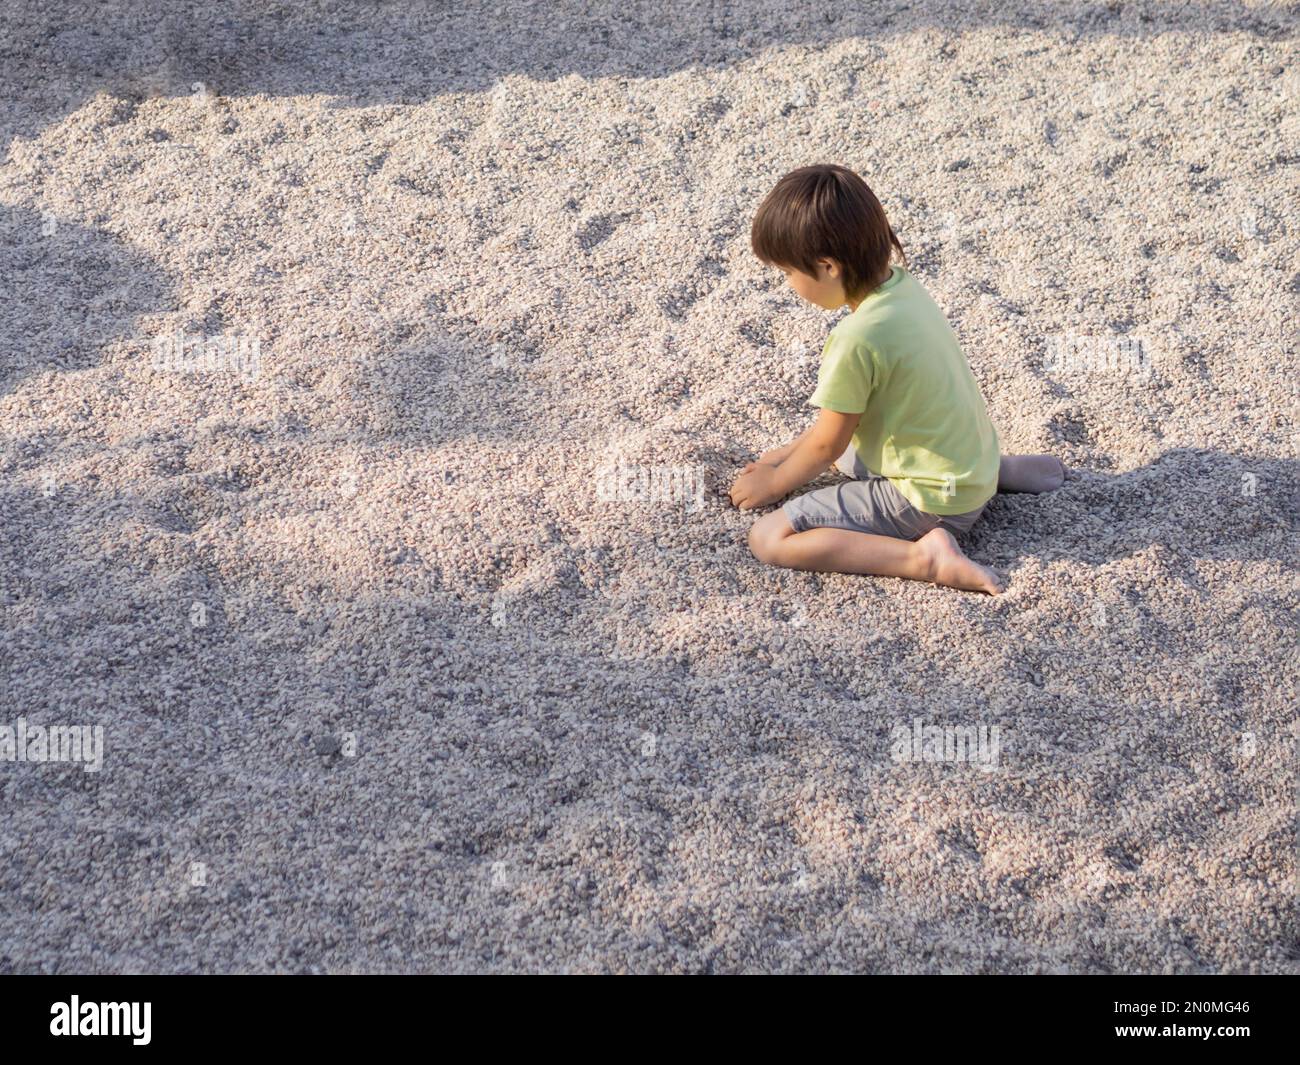 Boy is playing with gravel on modern children's playground. Developing fine motor skills and sensoric perception. Active leisure outdoors. Stock Photo